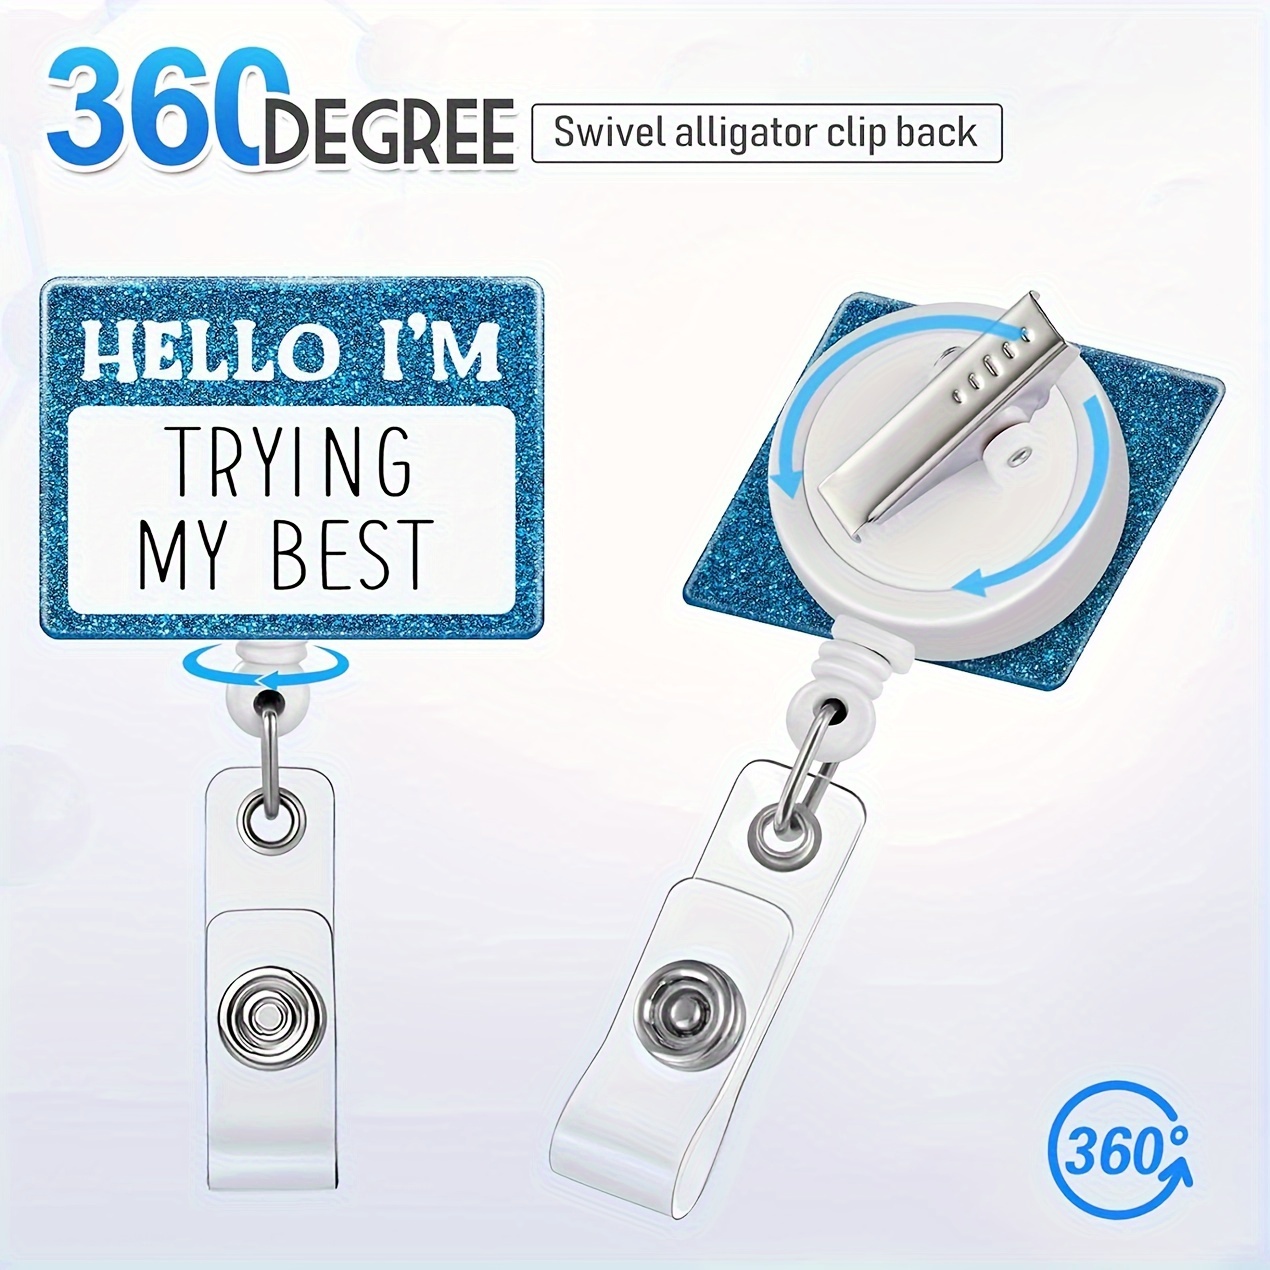 Hello. I’m trying my best. Badge reel.